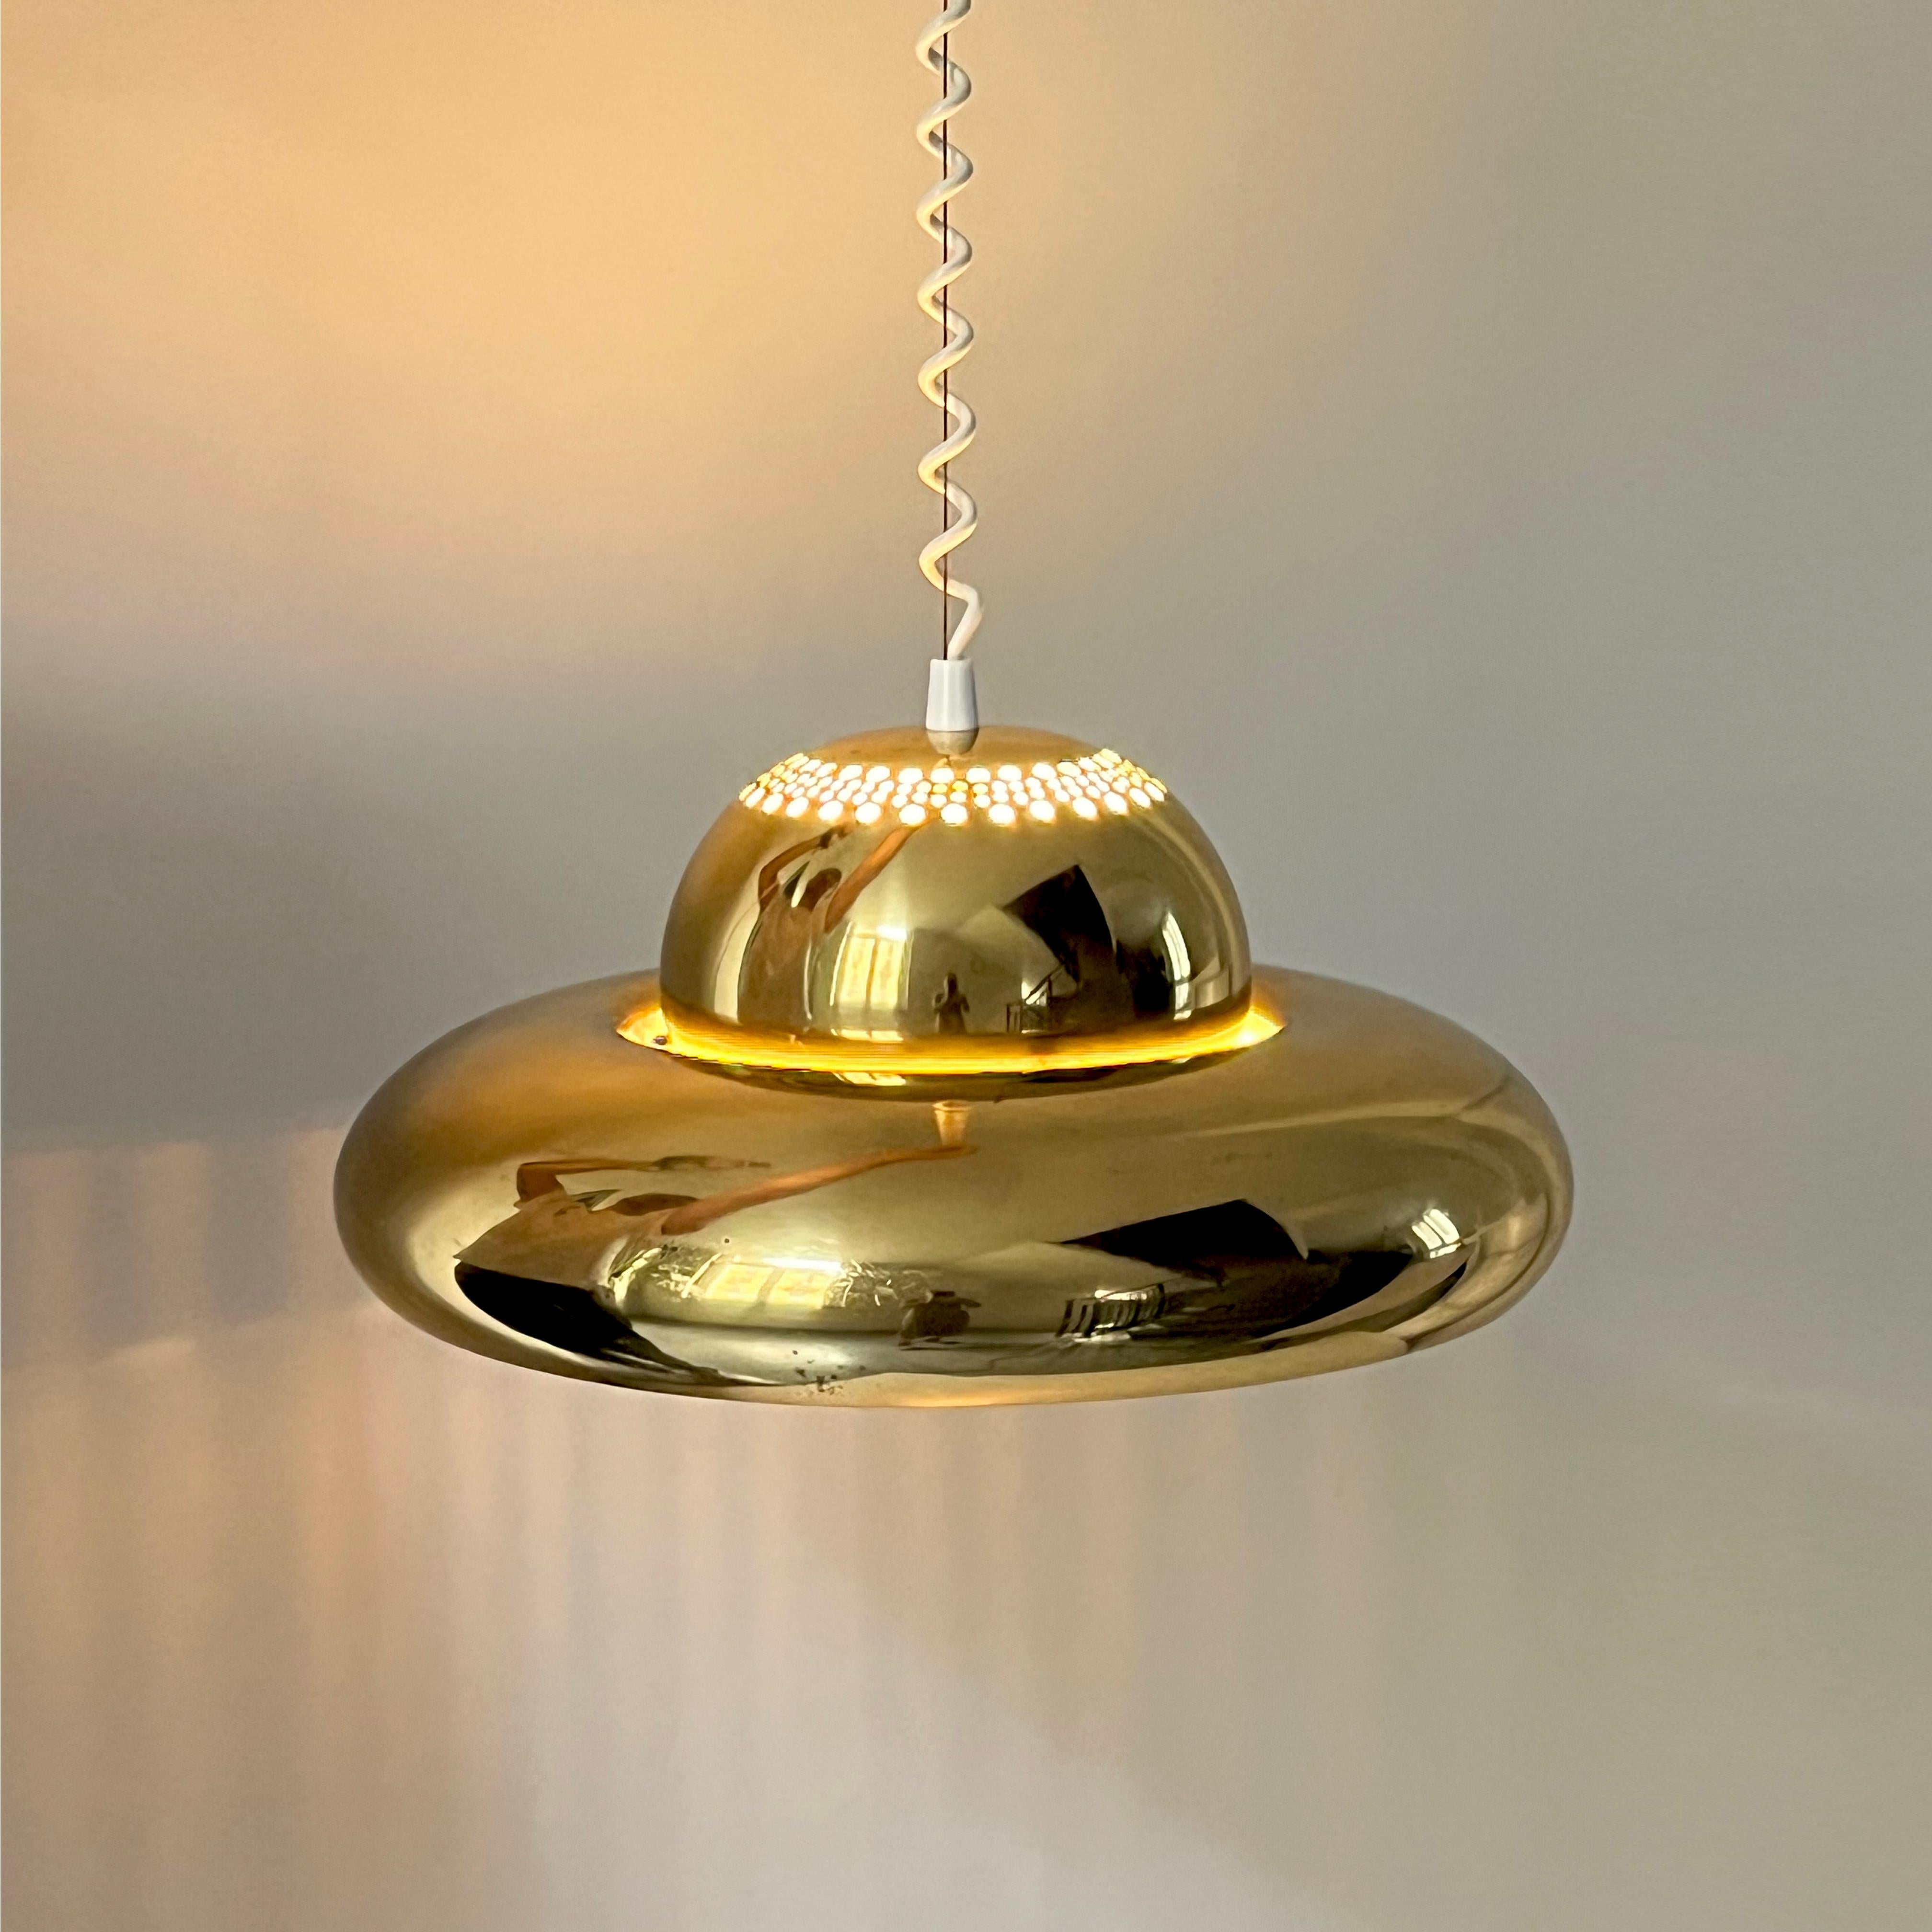 Brass Pendant Fior Di Loto by Afra and Tobia Scarpa for Flos, 1960s For Sale 3